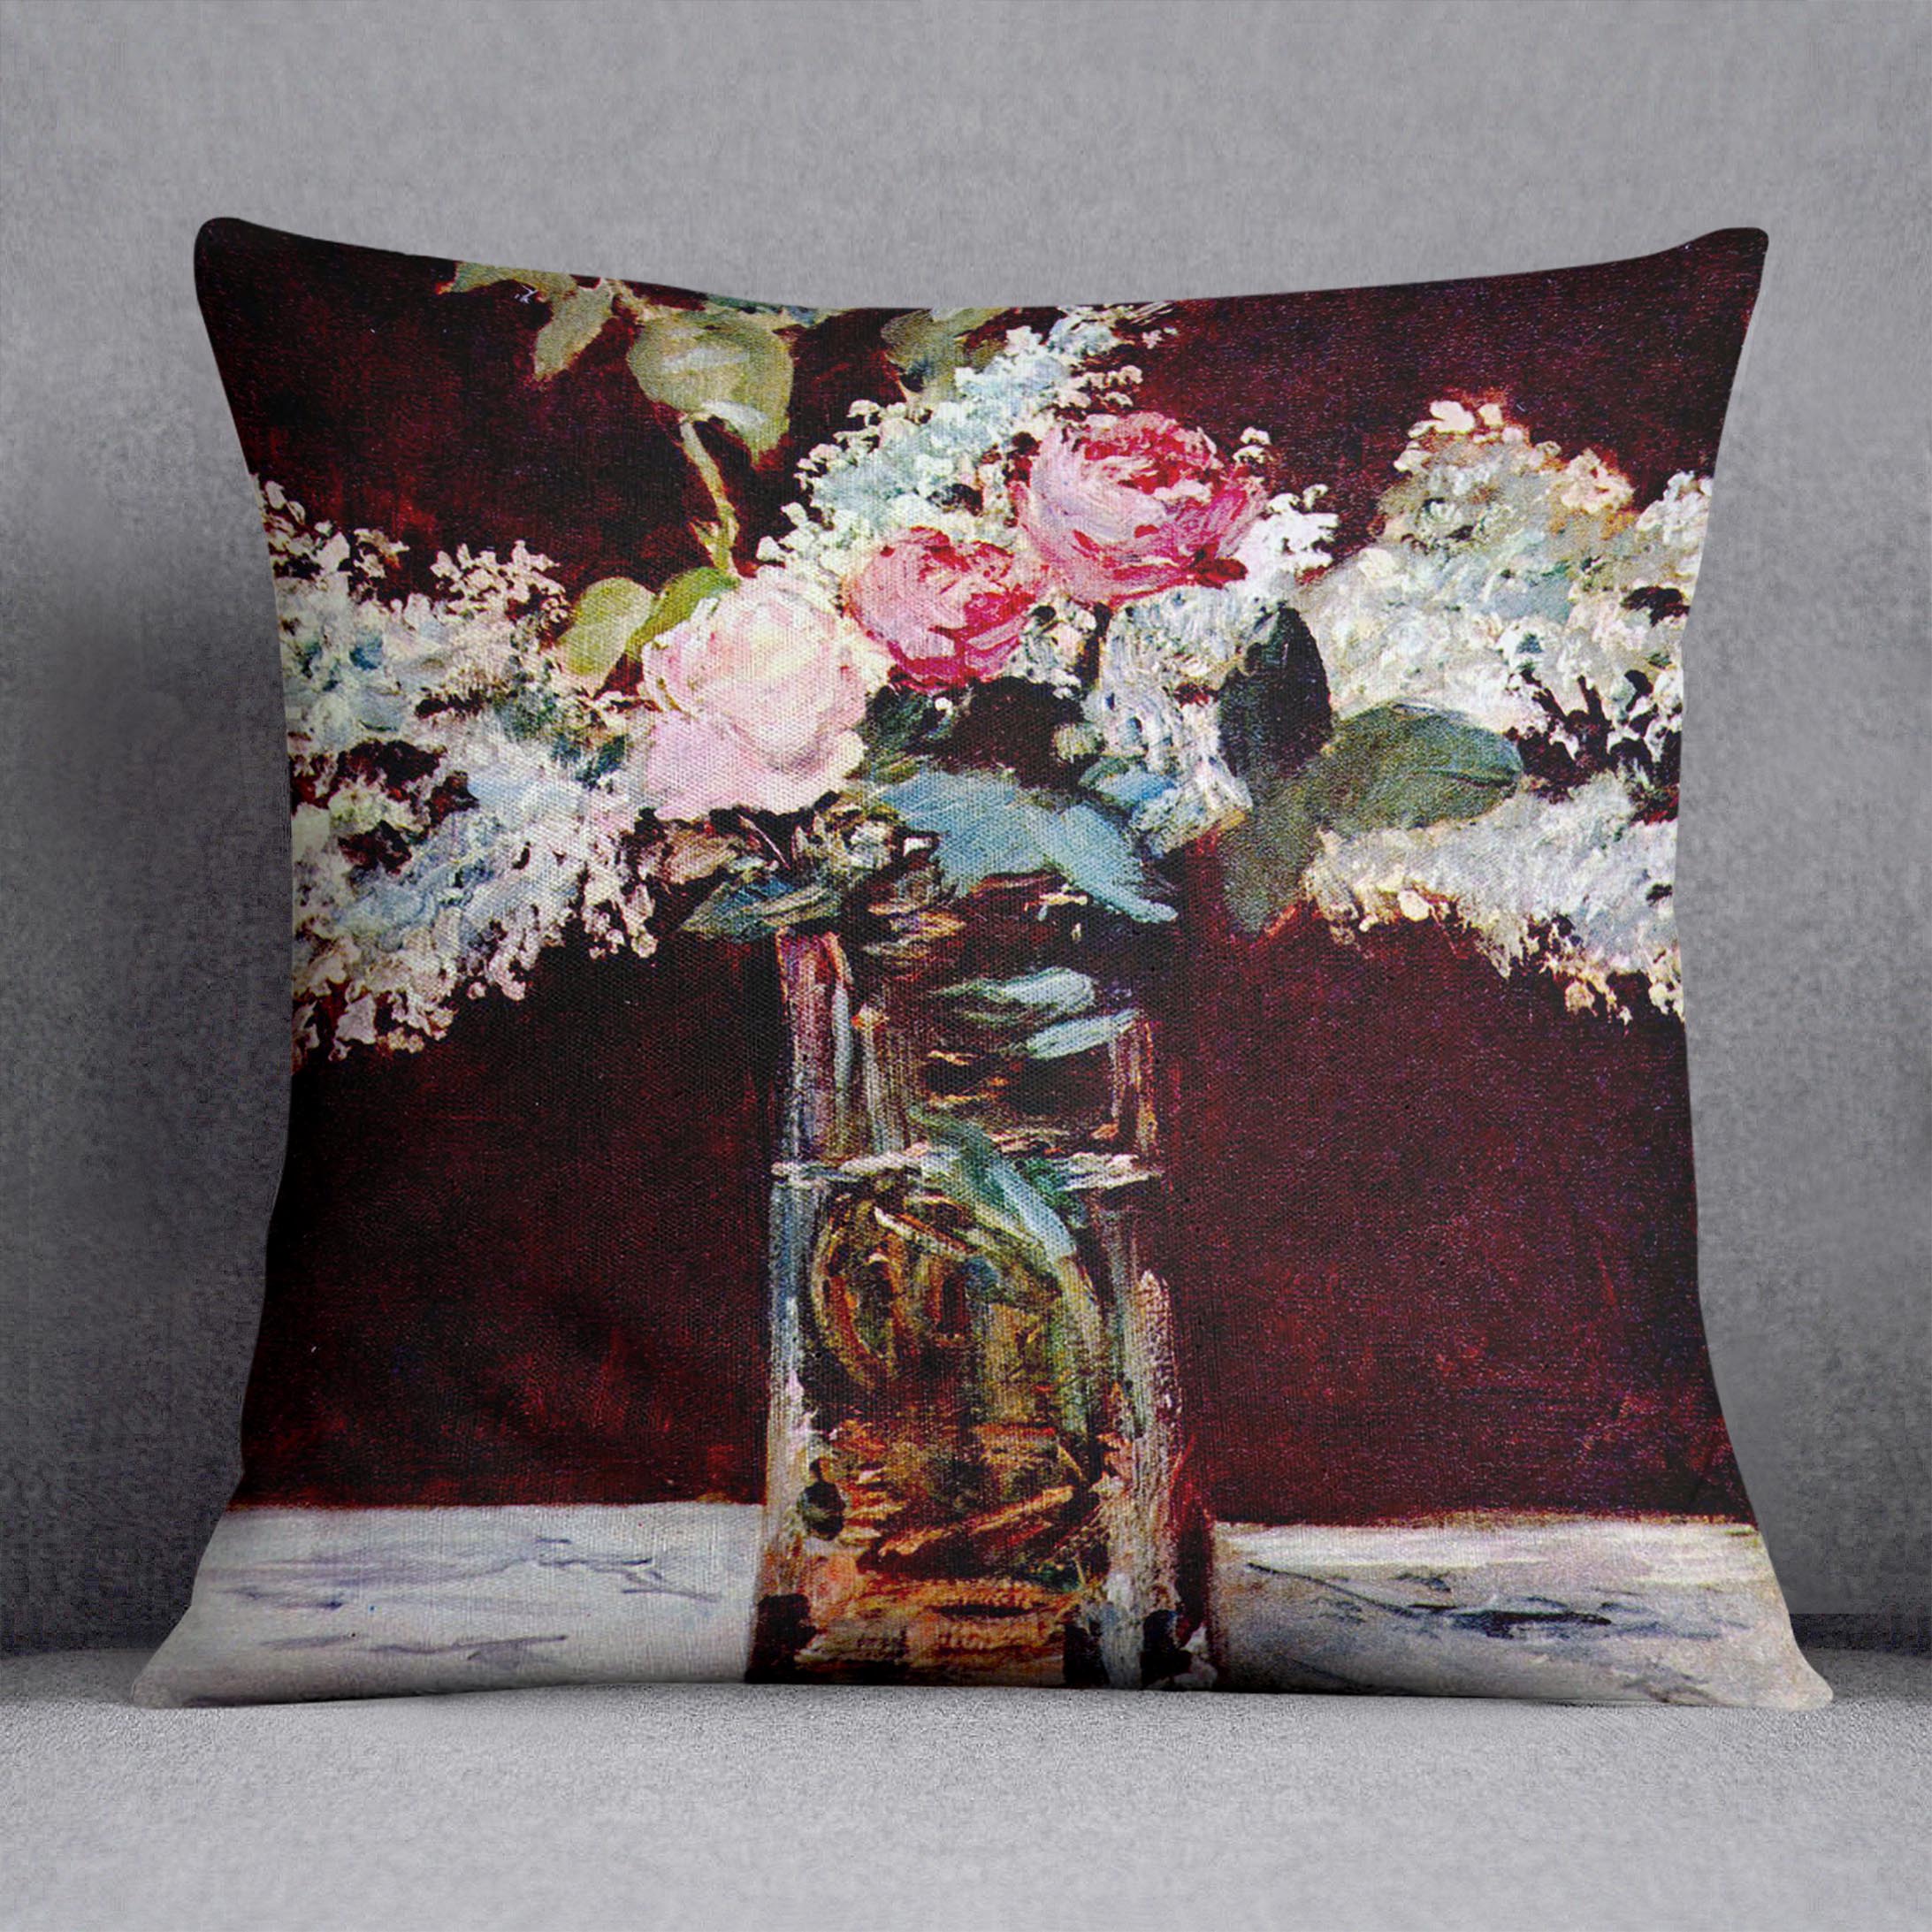 Still life lilac and roses by Manet Cushion